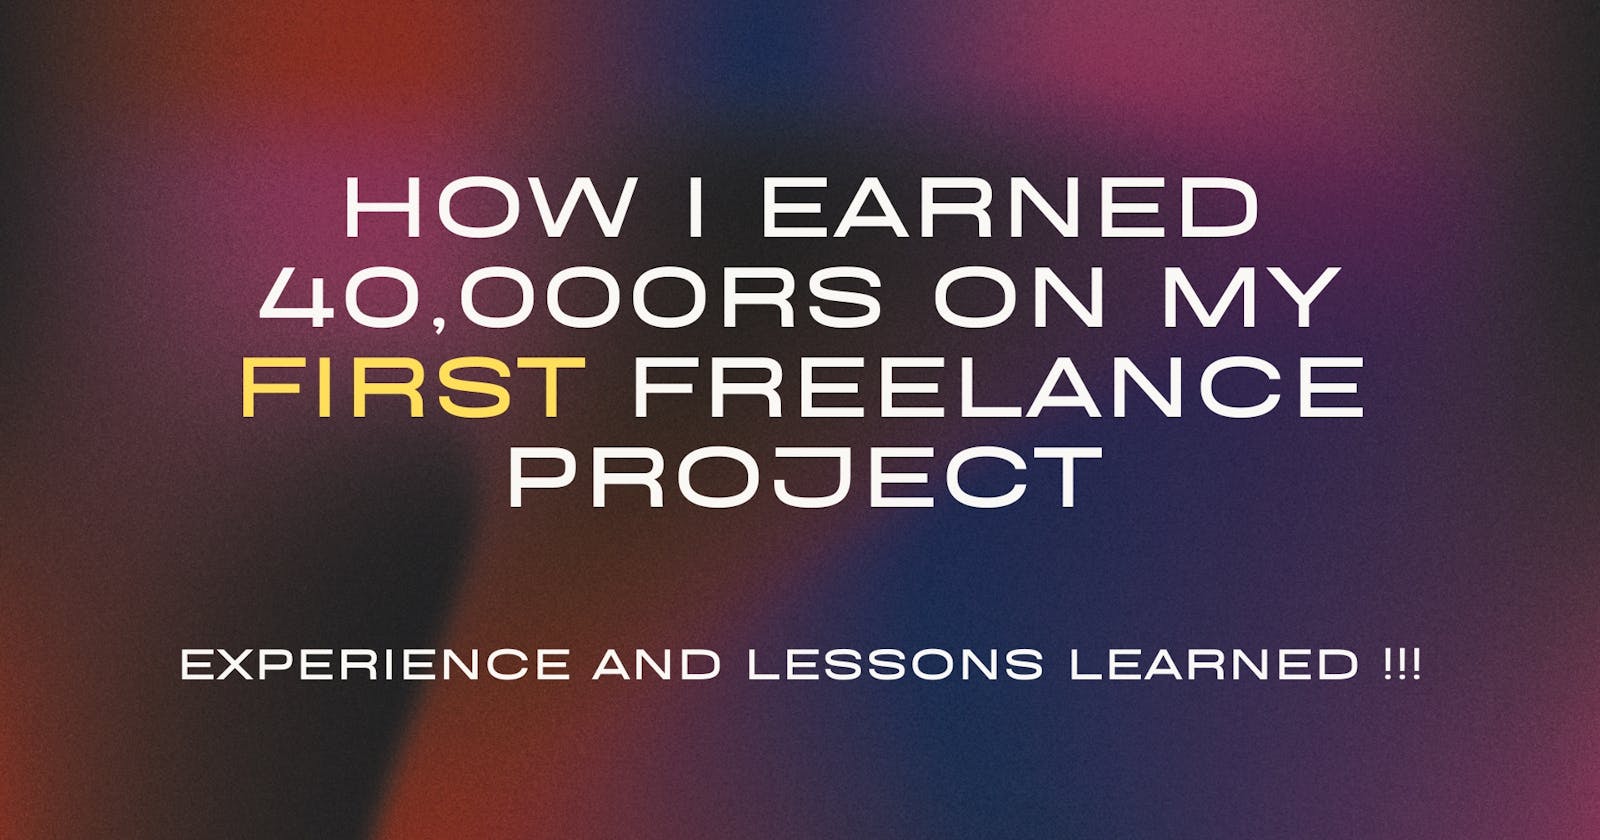 How I Earned 40,000rs on My First Freelancing Project: Experience and Lessons Learned